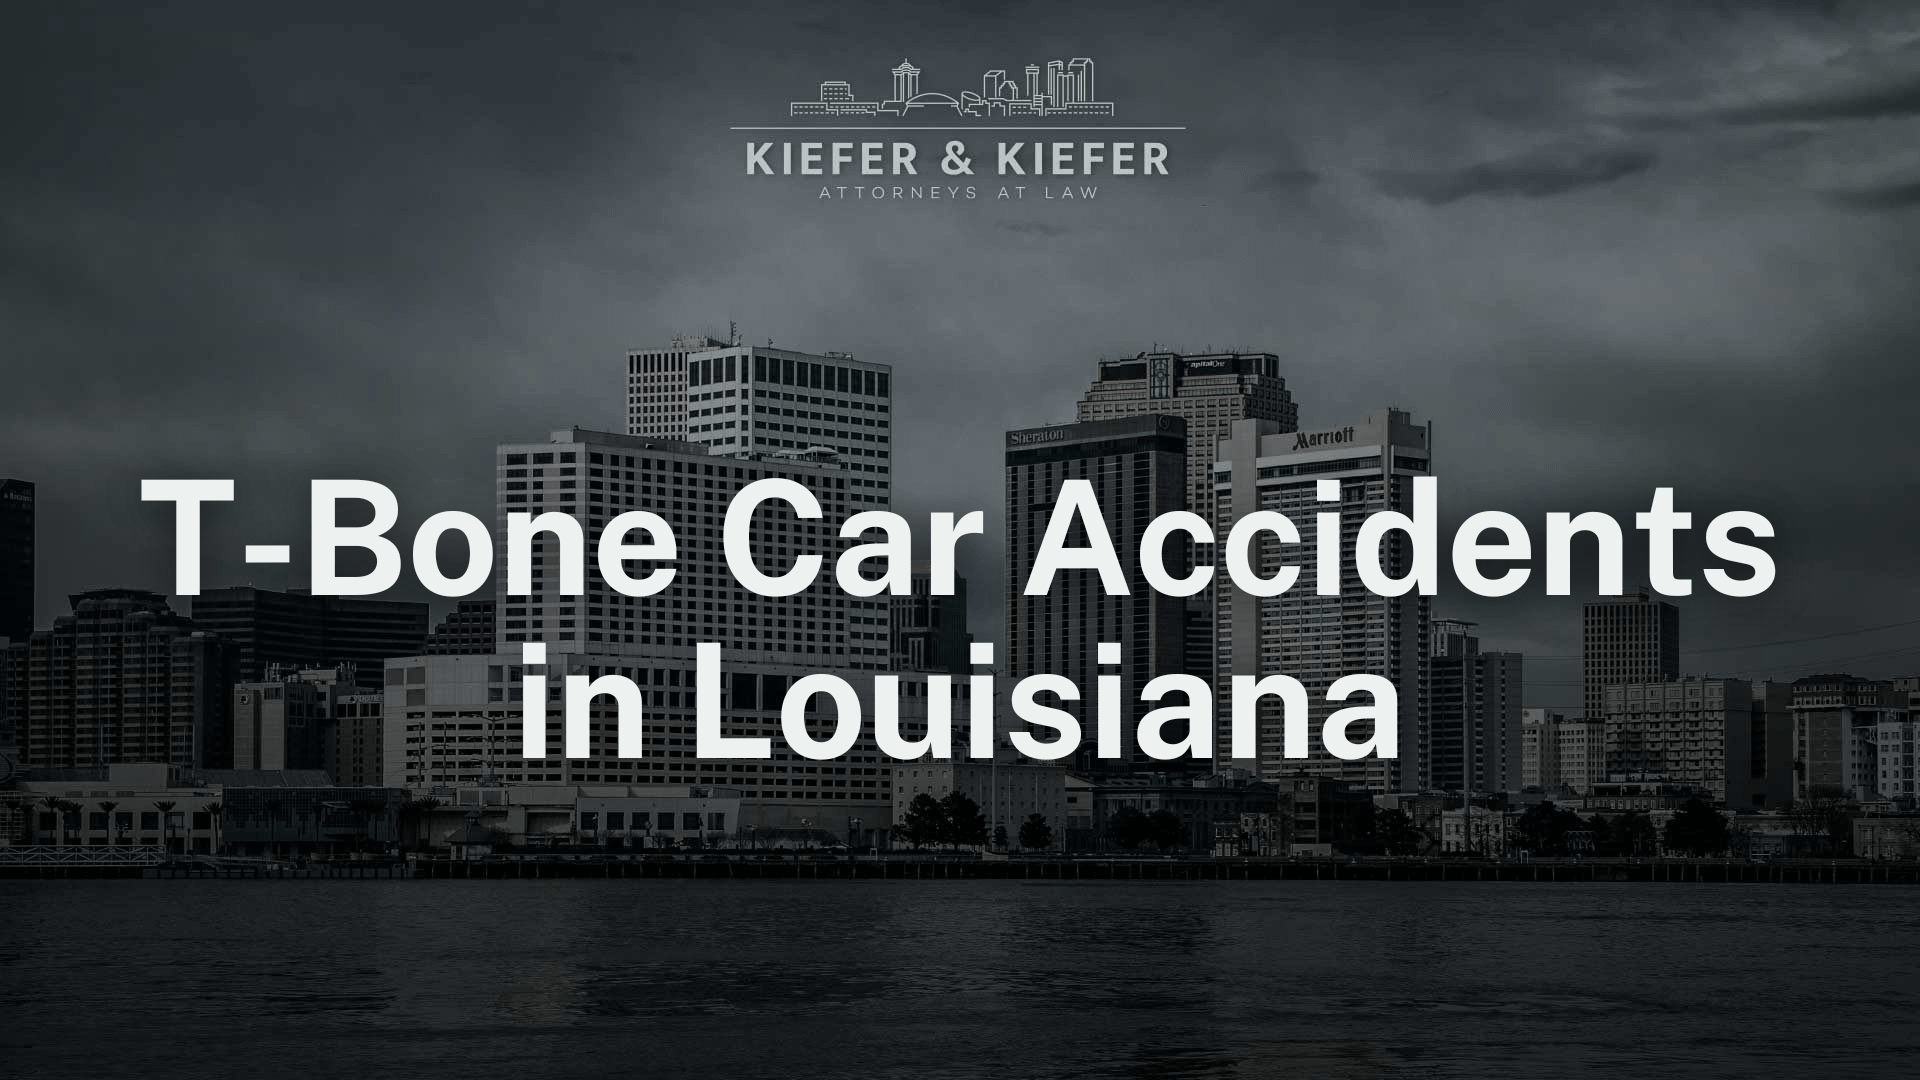 T-Bone Car Accidents in Louisiana - Kiefer & Kiefer New Orleans Personal Injury Attorneys